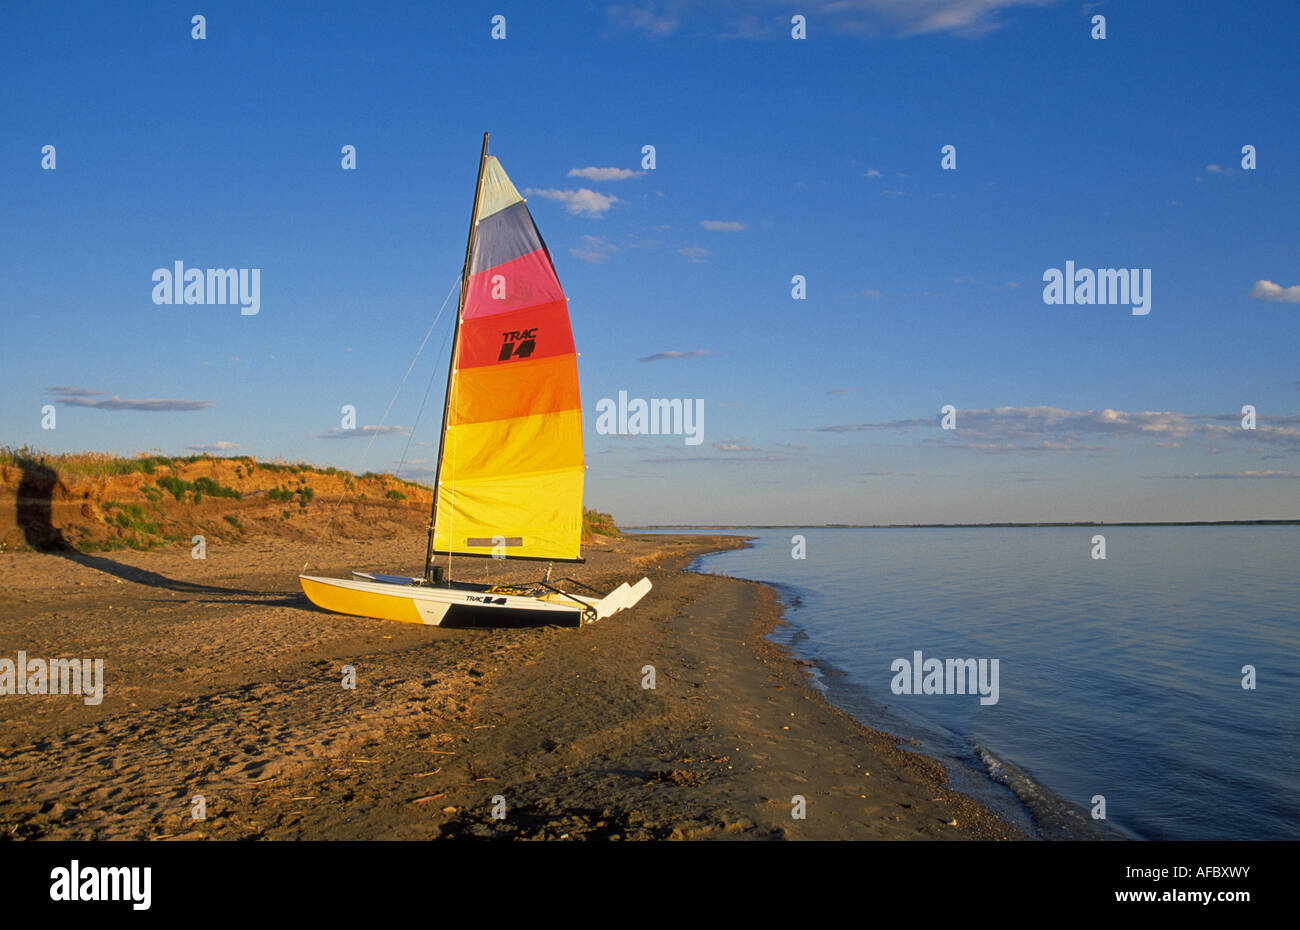 A view of a small sailboat on the beach of lake Diefenbaker in Douglas Provincial Park, Saskatchewan, Canada. Stock Photo